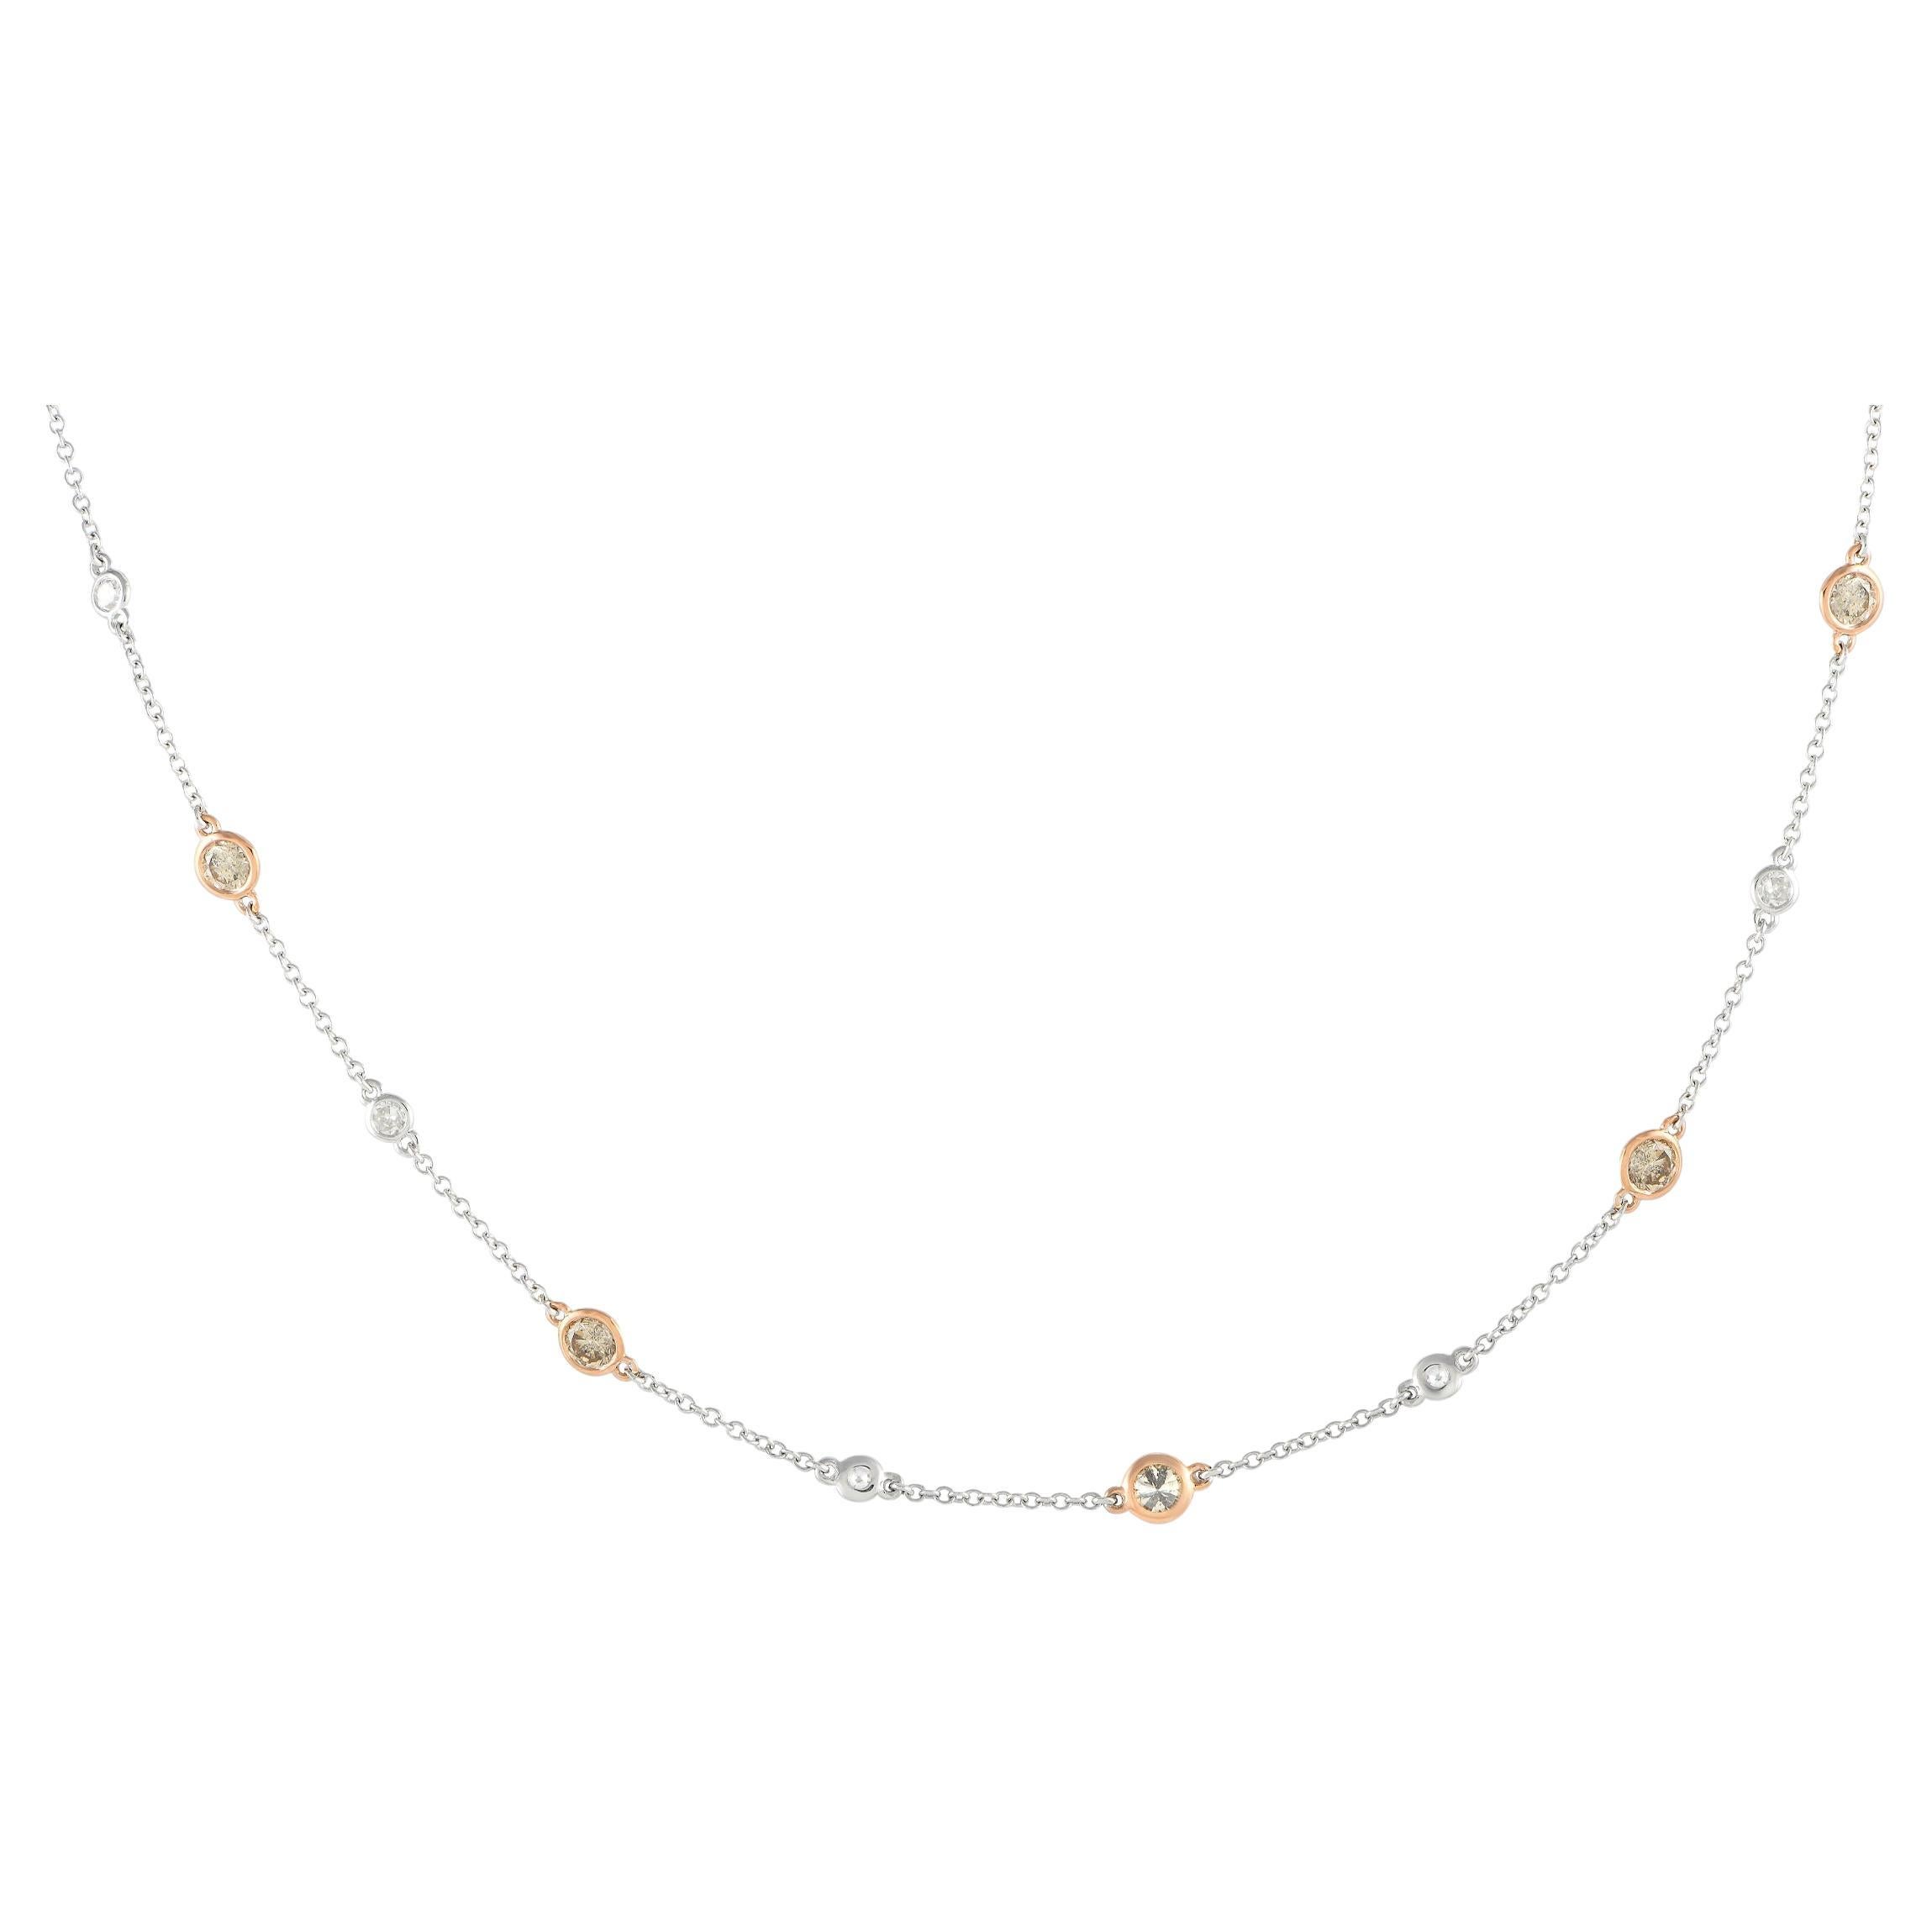 LB Exclusive 14K White and Rose Gold 3.23ct Diamond Station Necklace For Sale